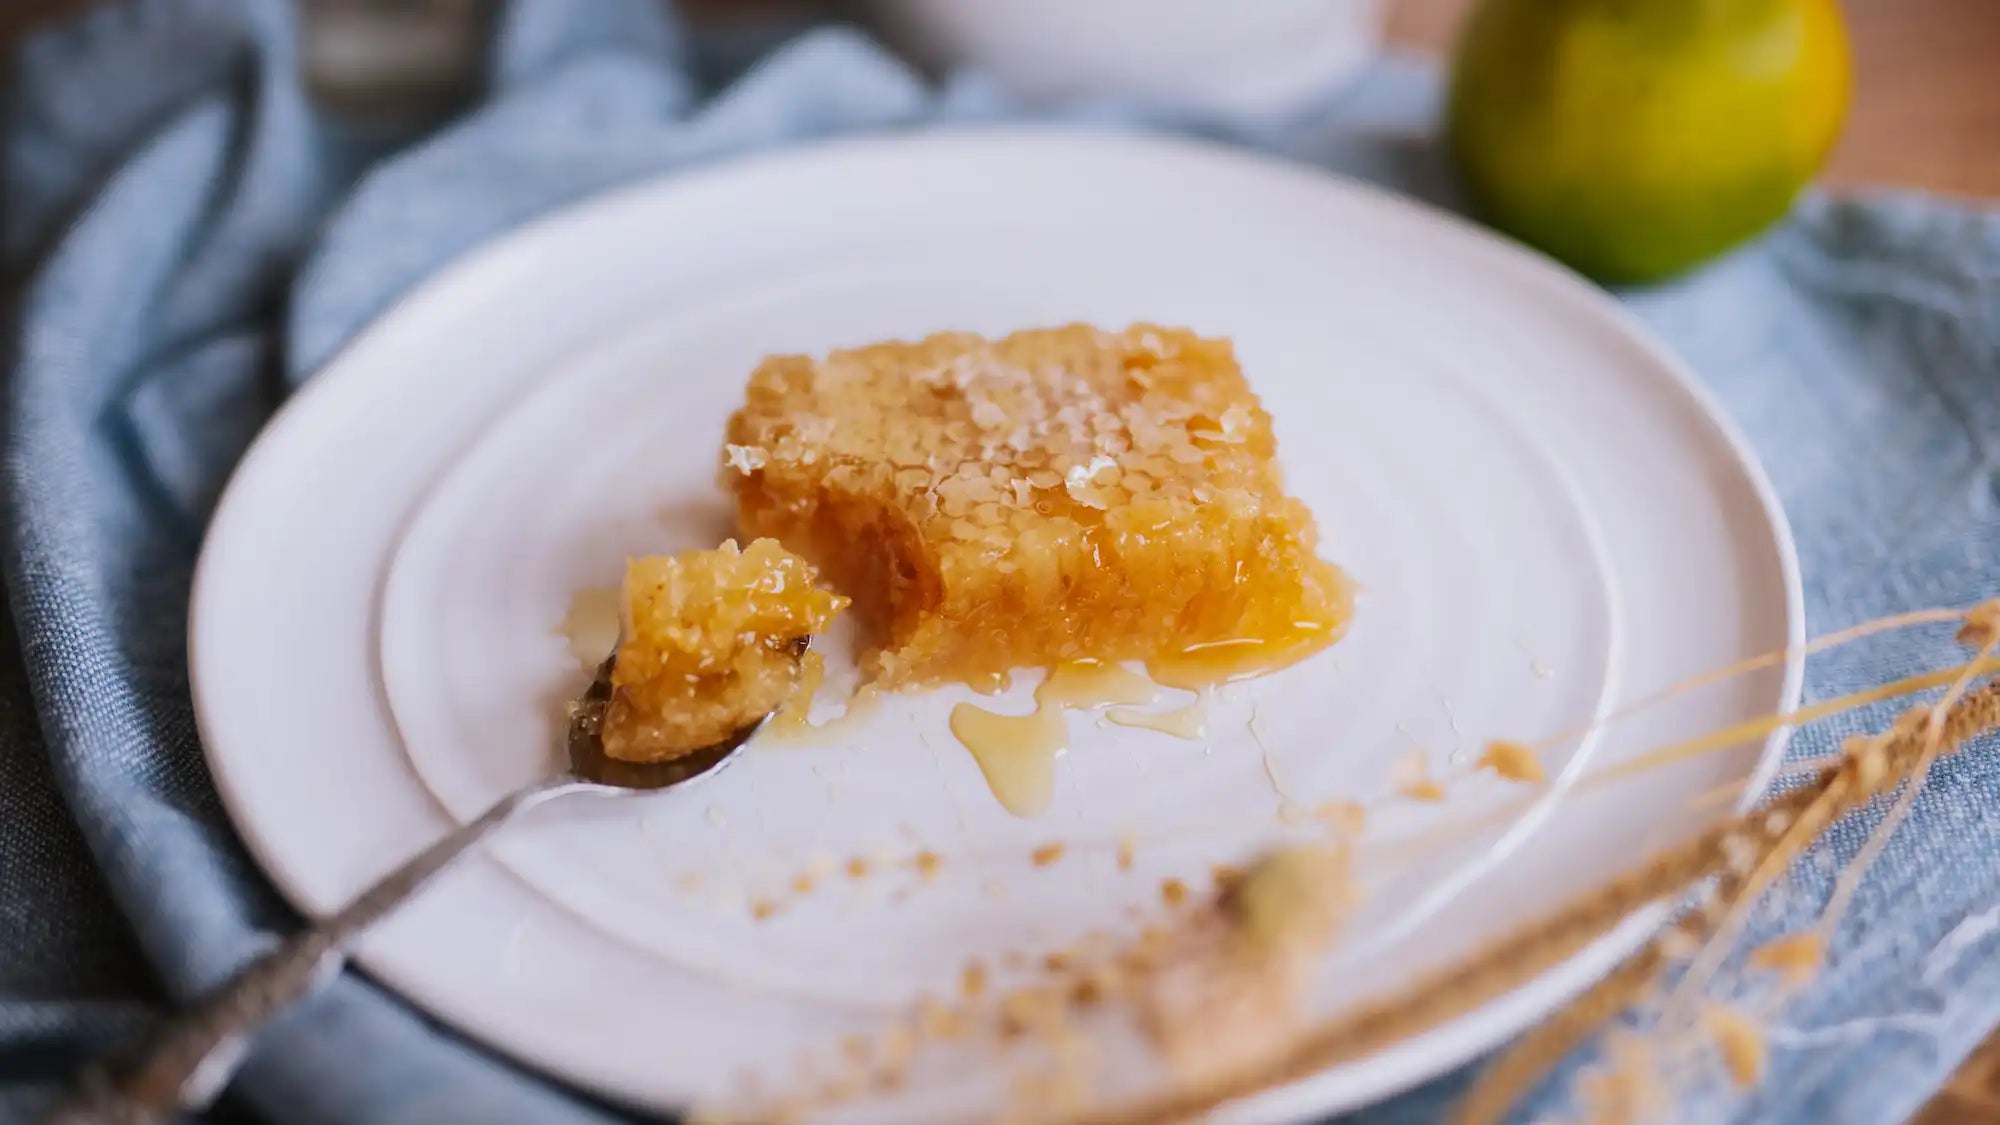 spoon cutting off a piece of acacia honeycomb on a plate with blue linens